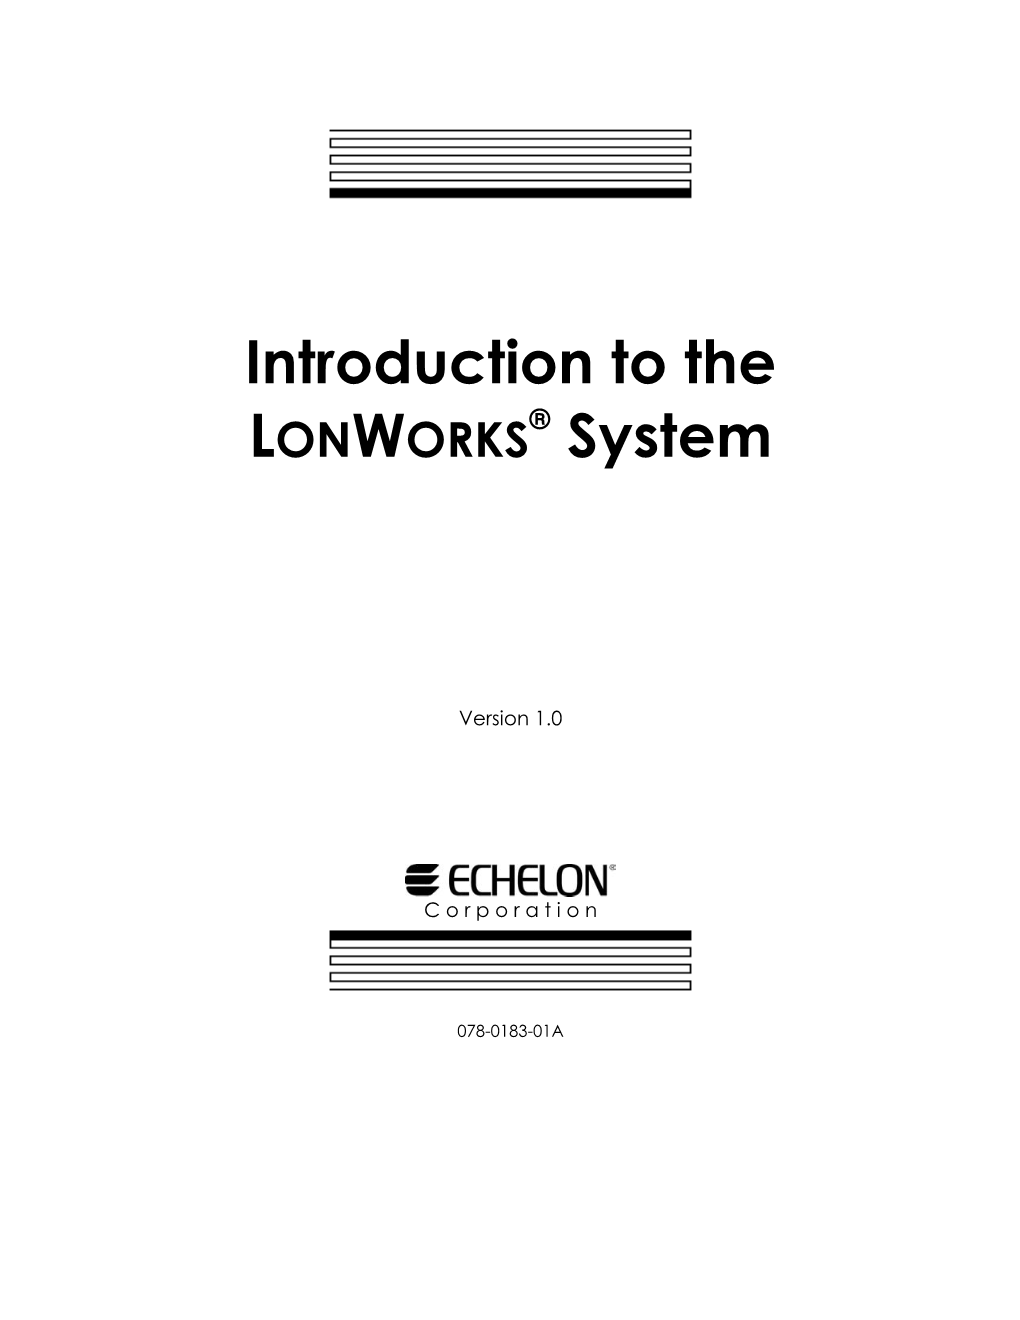 LONWORKS Devices